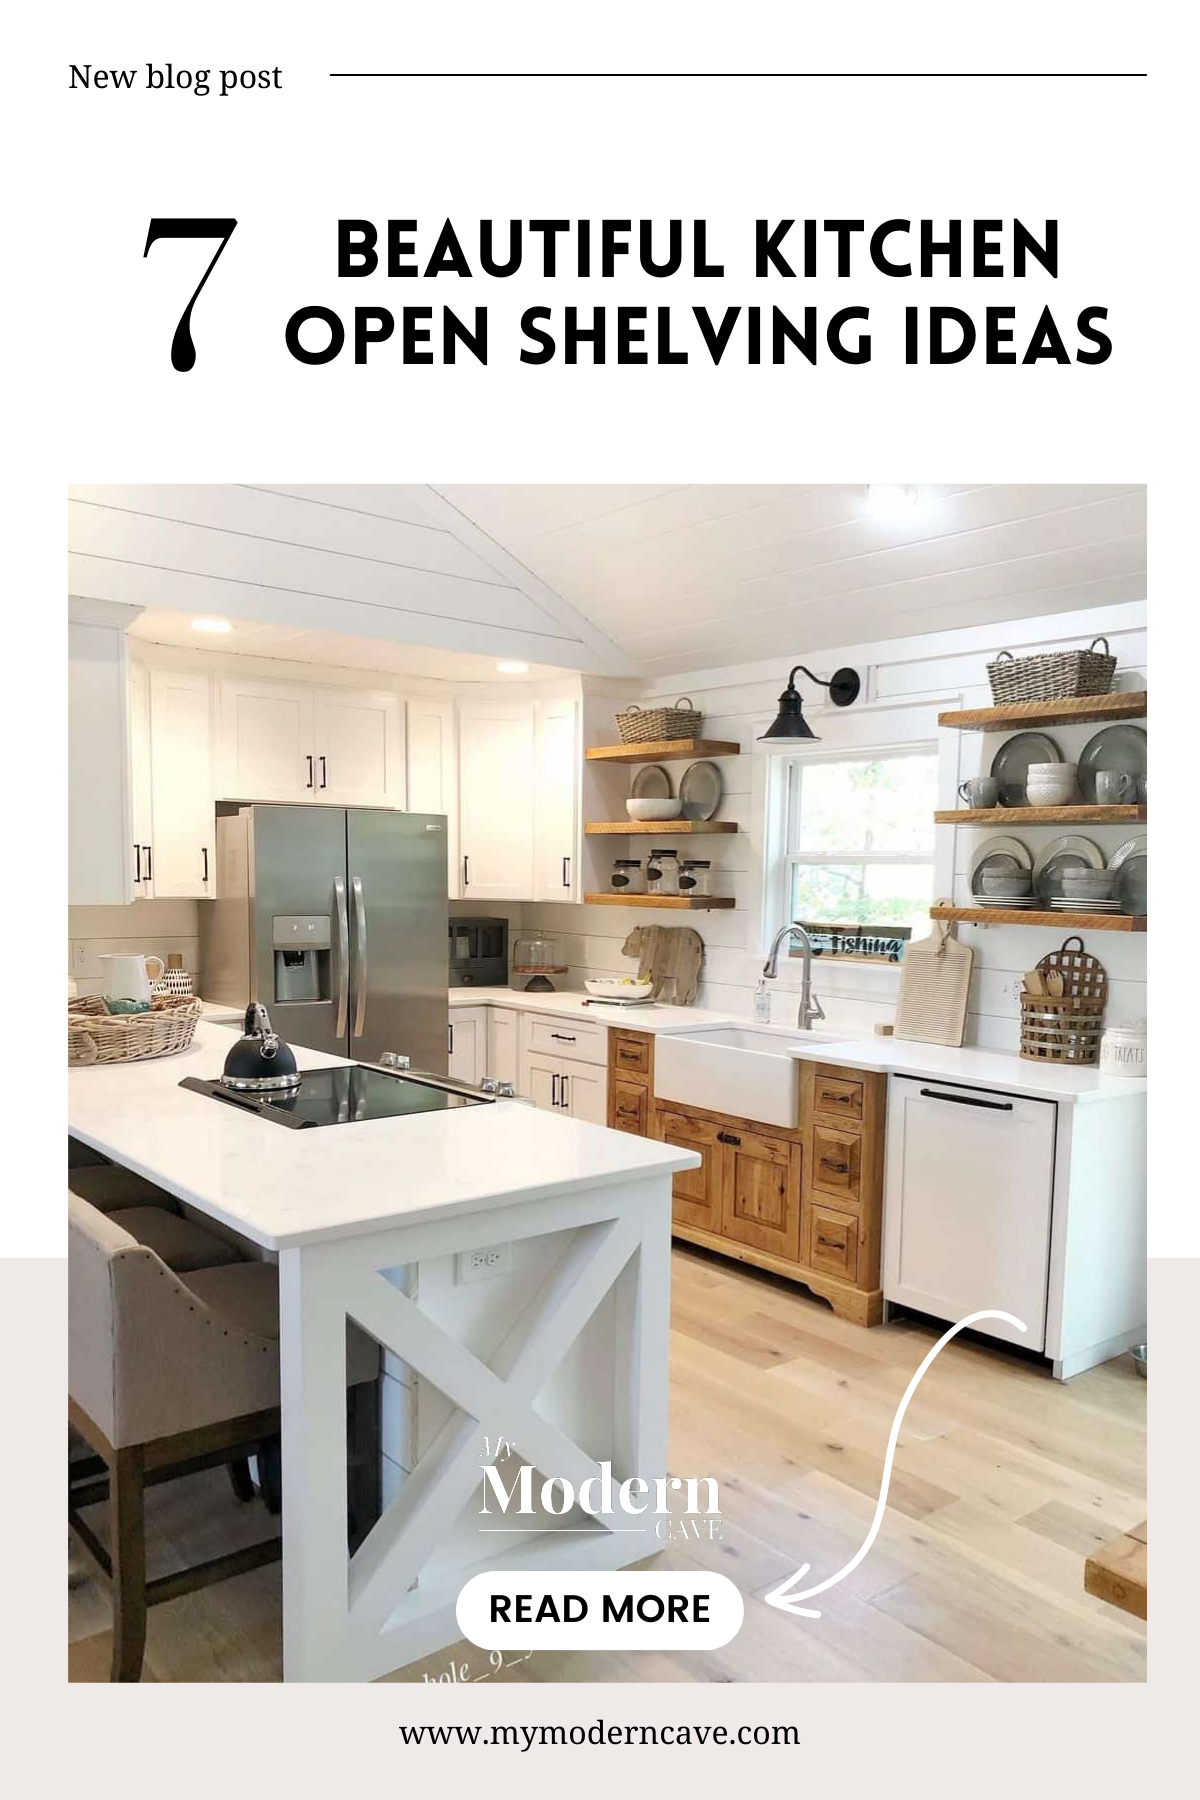 Kitchen Open Shelving Ideas Infographic